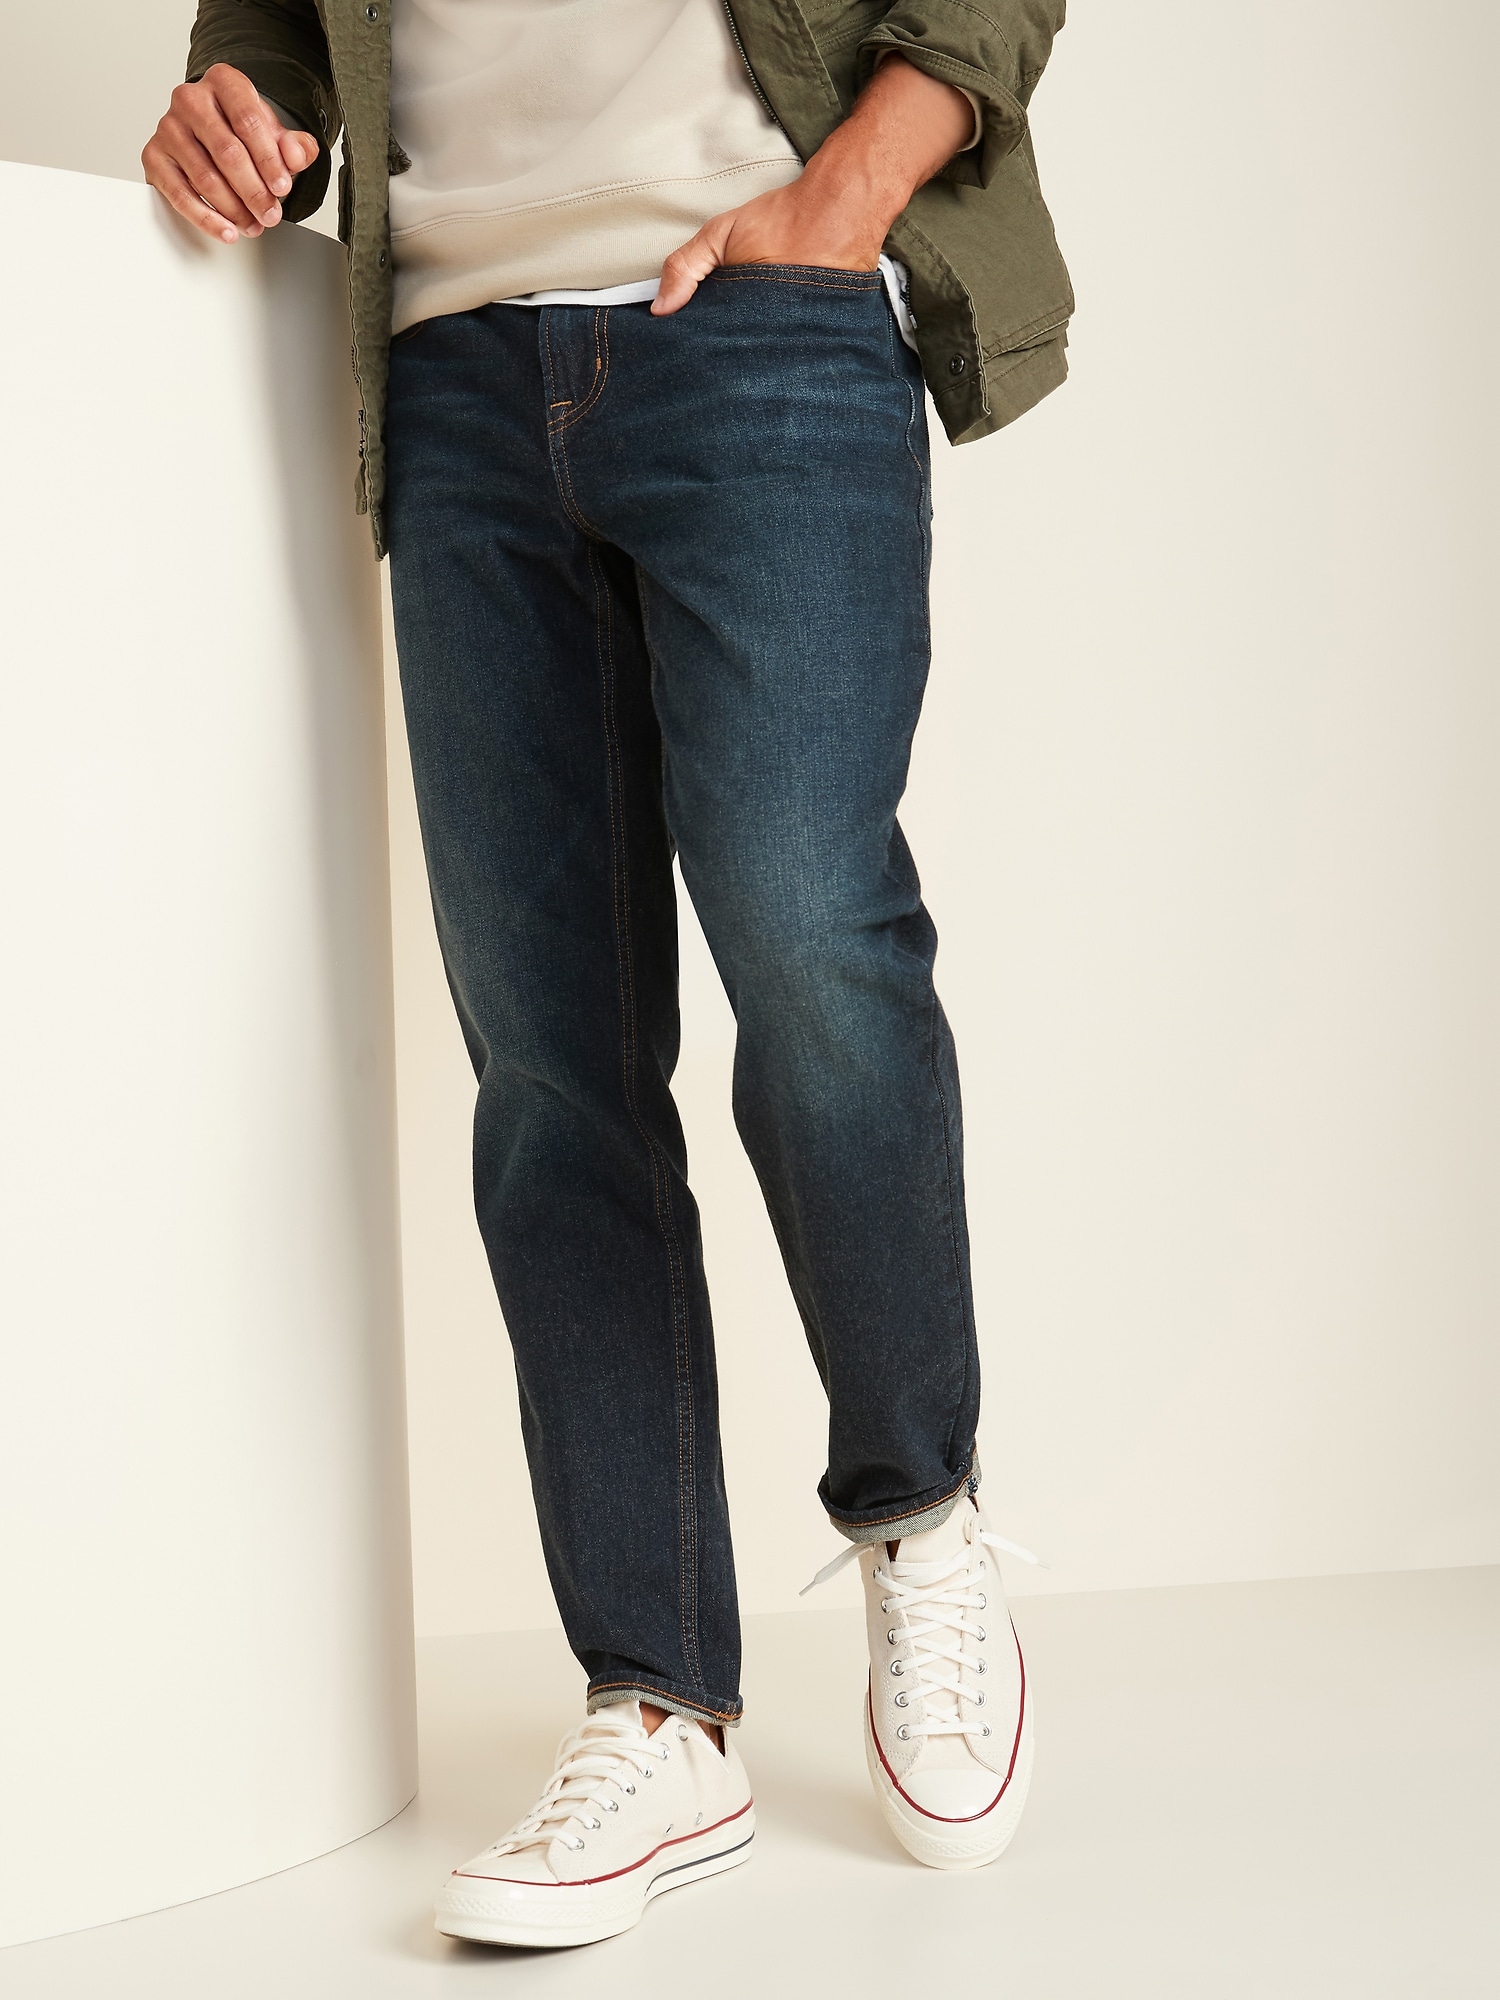 mens jeans with tapered ankle